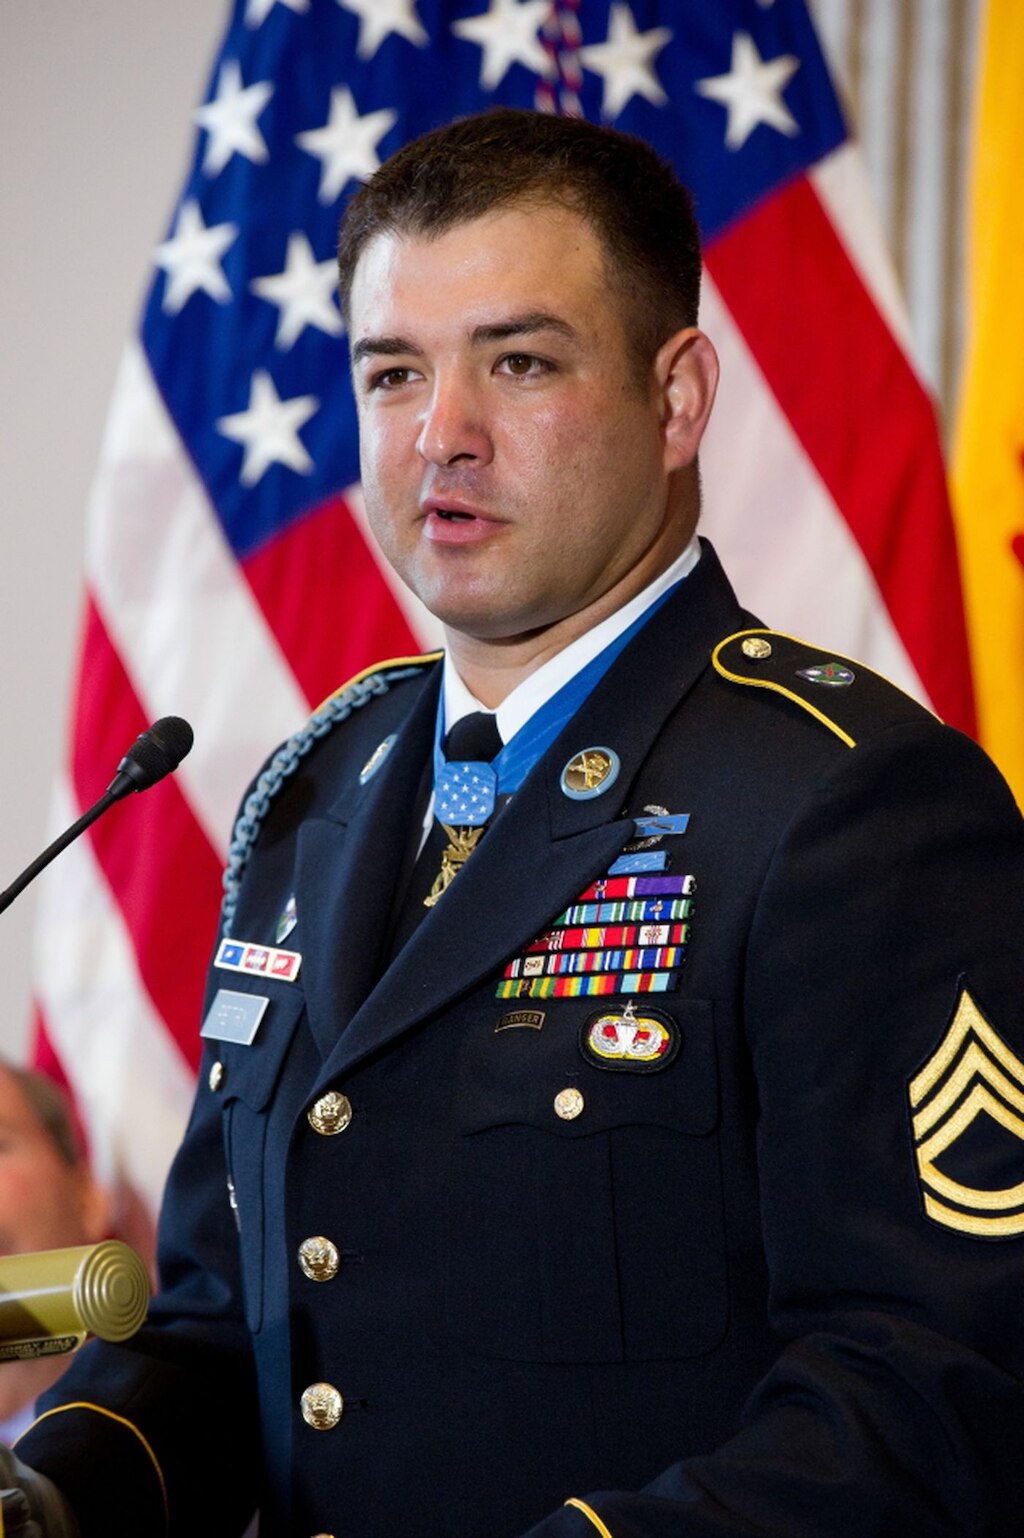 recent medal of honor winners